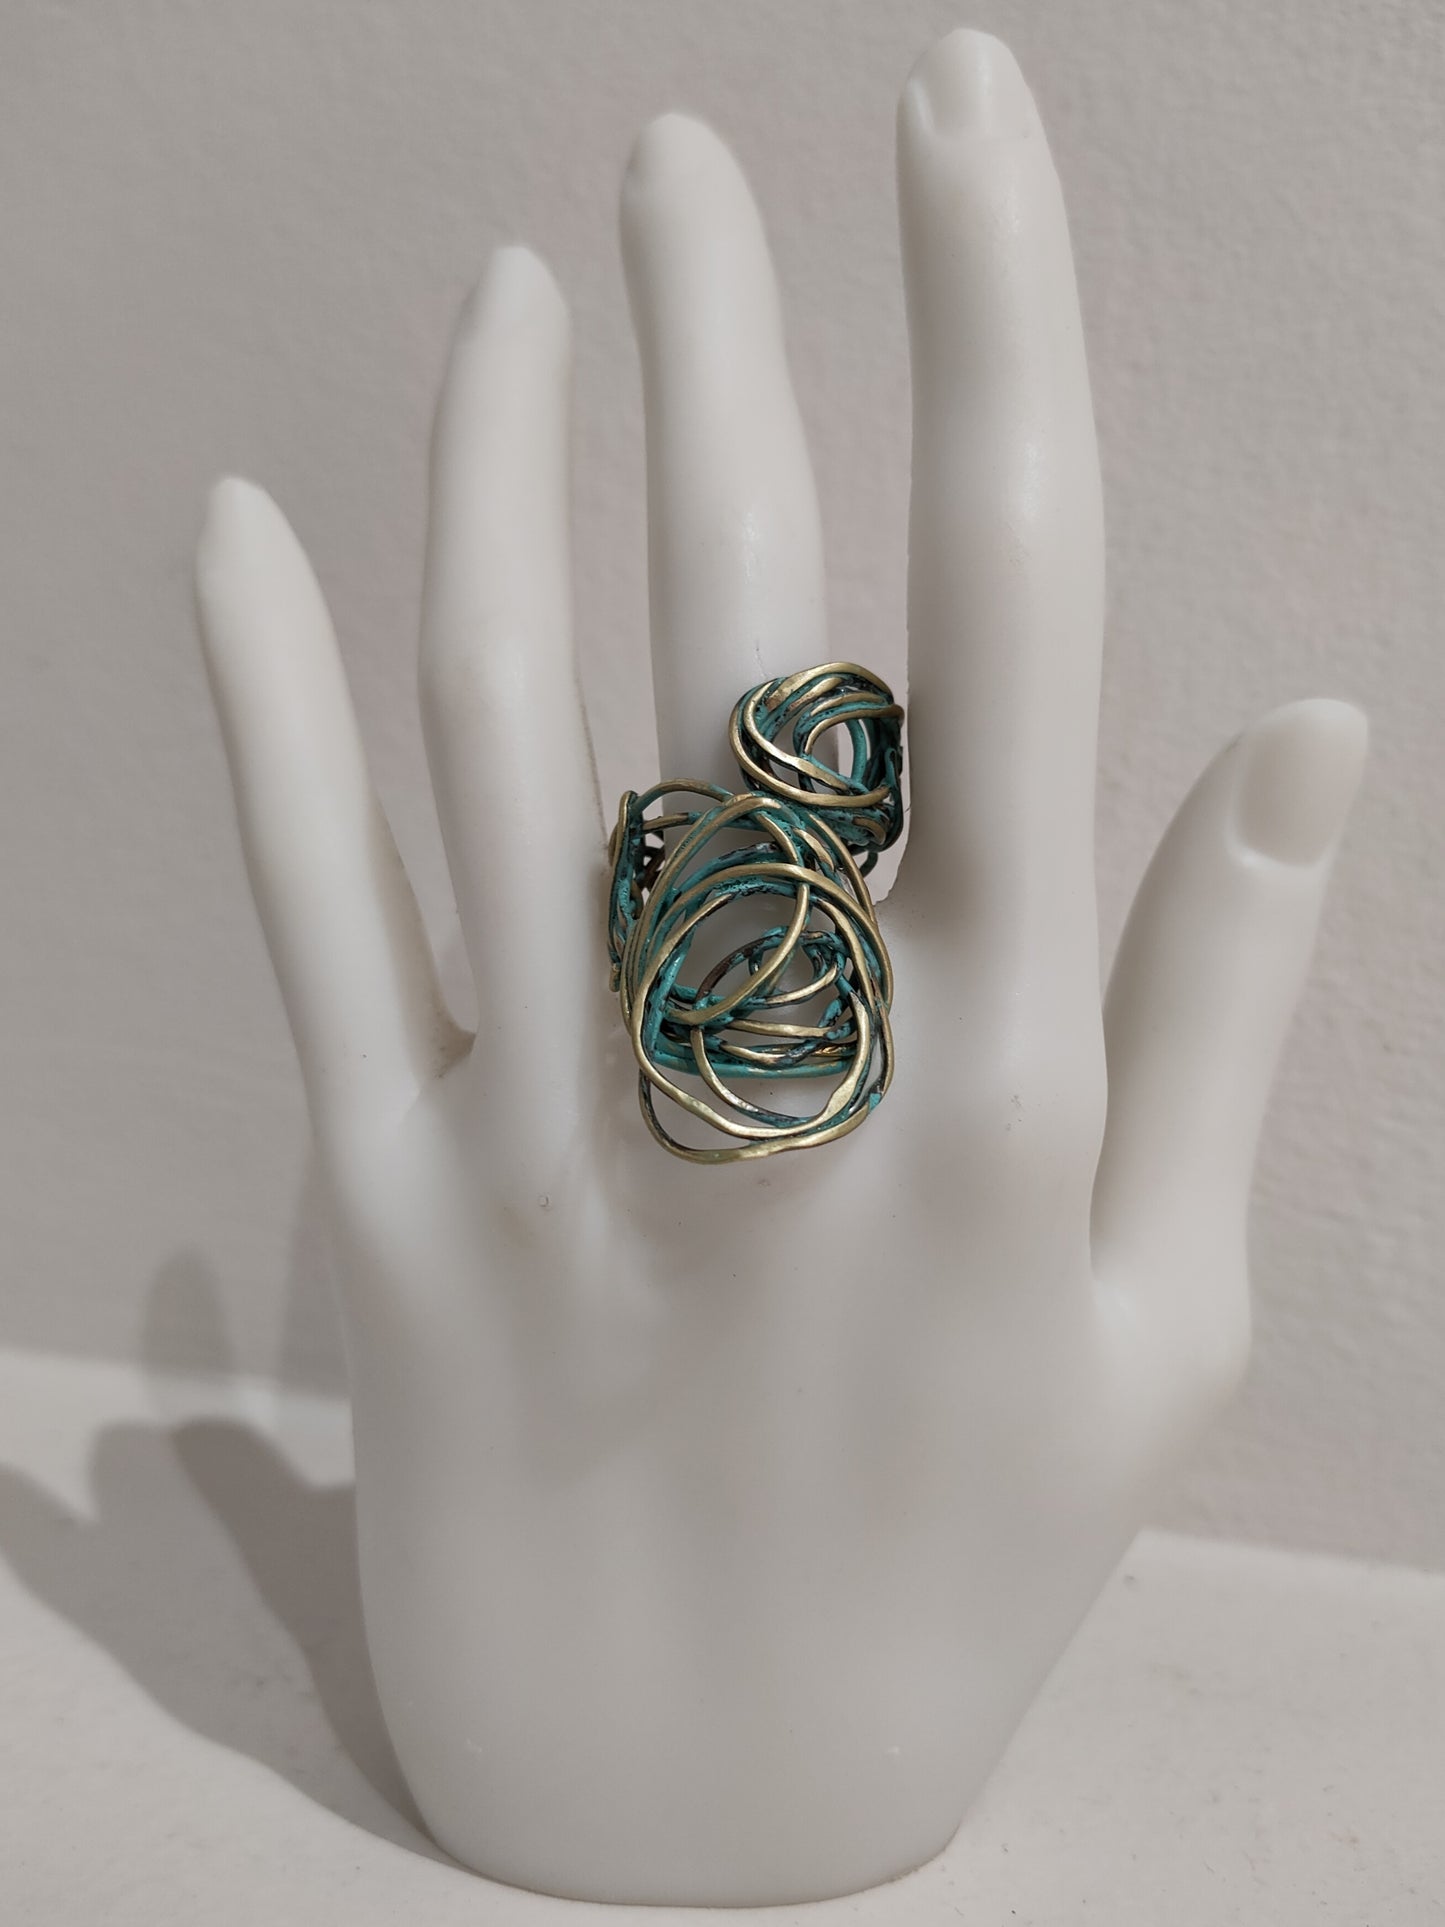 Single ring in bronze and copper with green patina